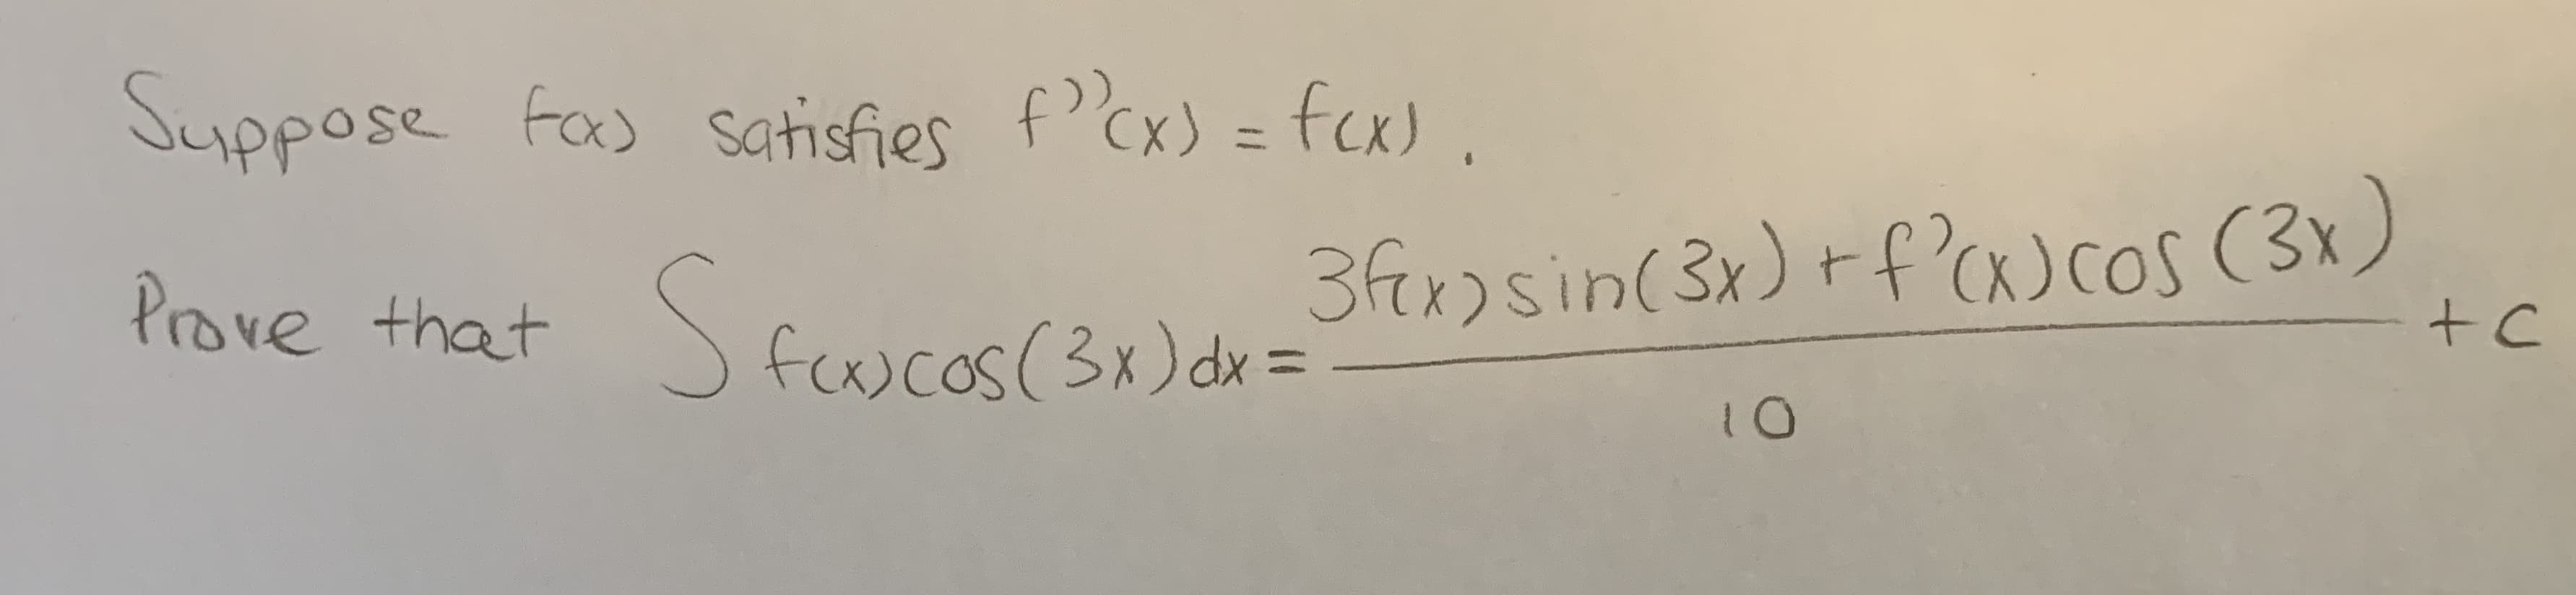 Suppose Fas satisfies f'cx) = fex).
Prove that
3fx)sin(3x) + f'cx)cos (3x)
Sfewcos(3x) dx =
%3D
10
